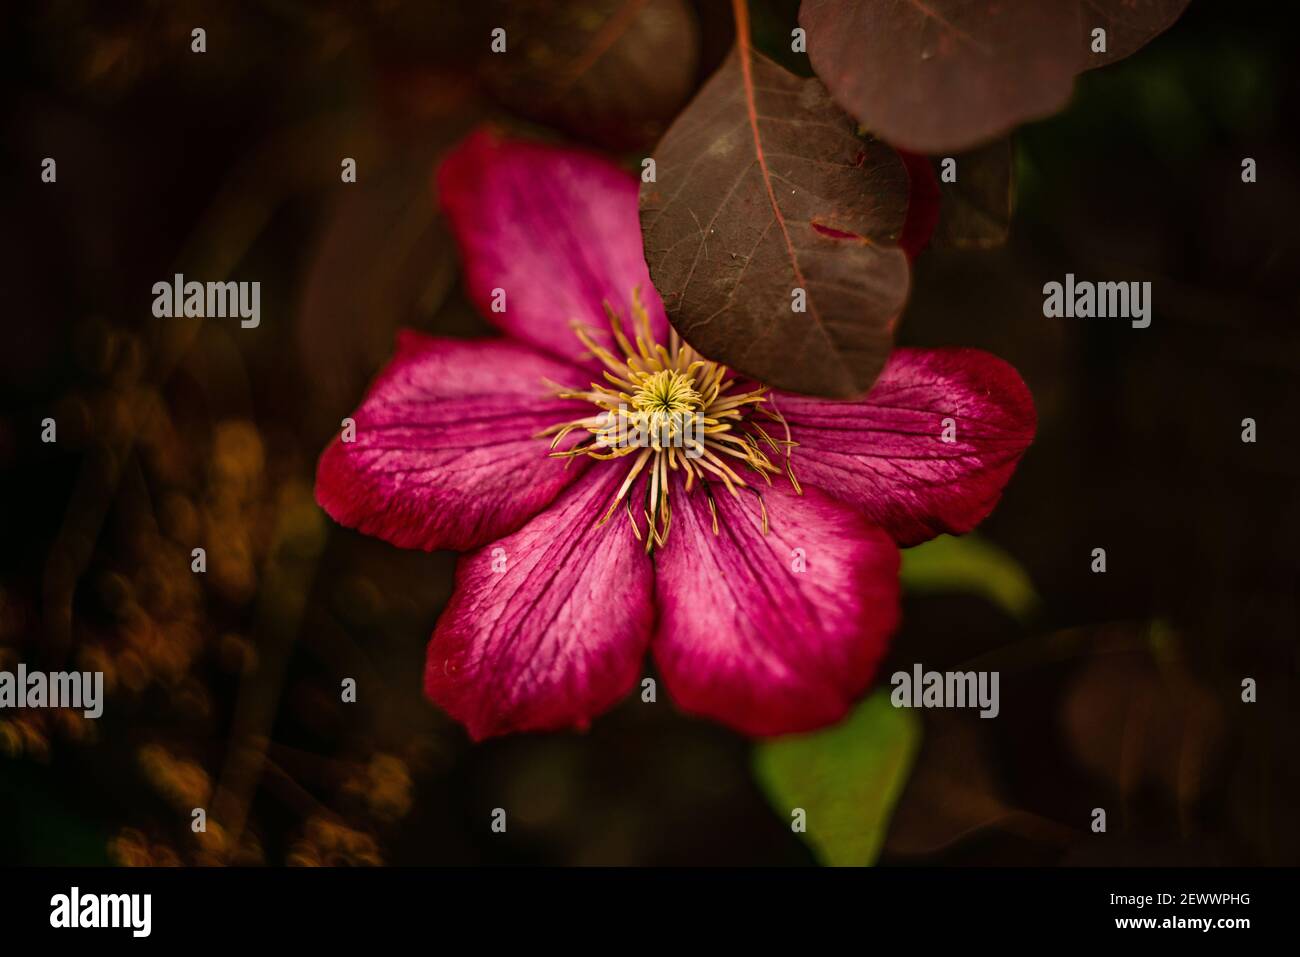 Large megenta pink Clematis with yellow core and purple leaves Stock Photo